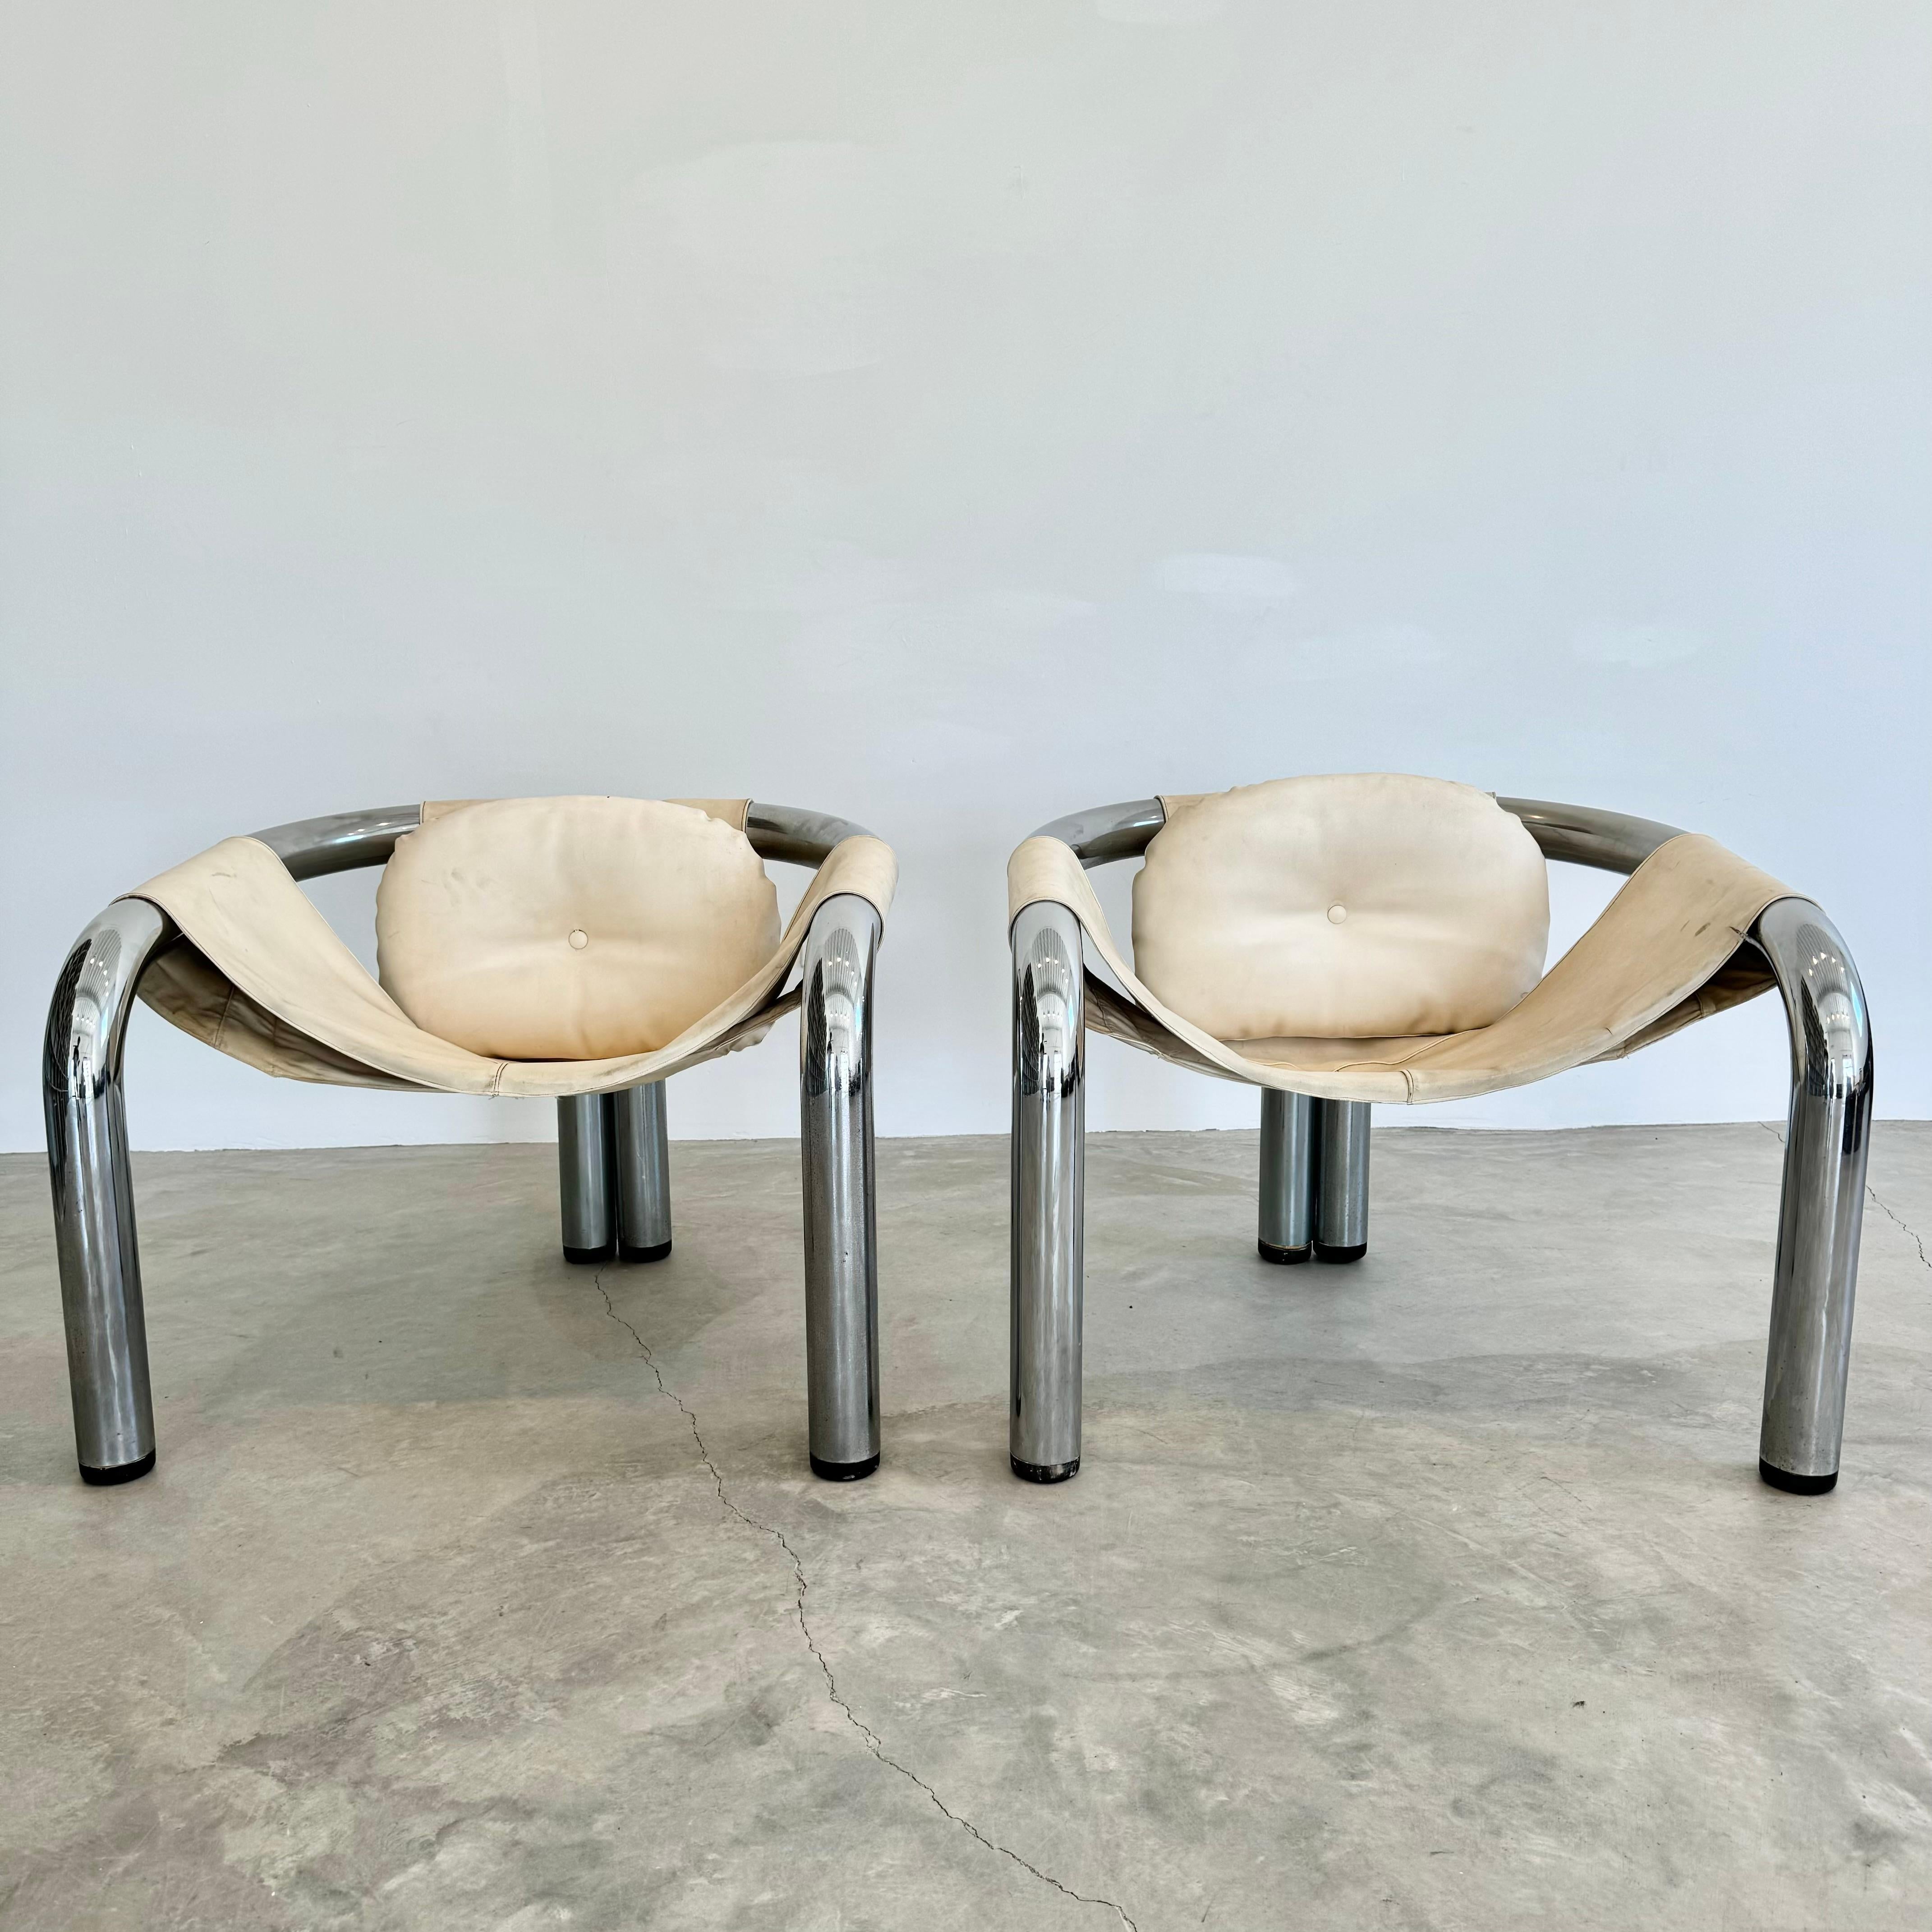 Important pair of armchairs by American designer Byron Botker. Large, tubular chrome frame makes a substantial and grounded seat. Synthetic upholstery with wear as shown. Completely original condition. Designed for Landes Manufacturing in the 